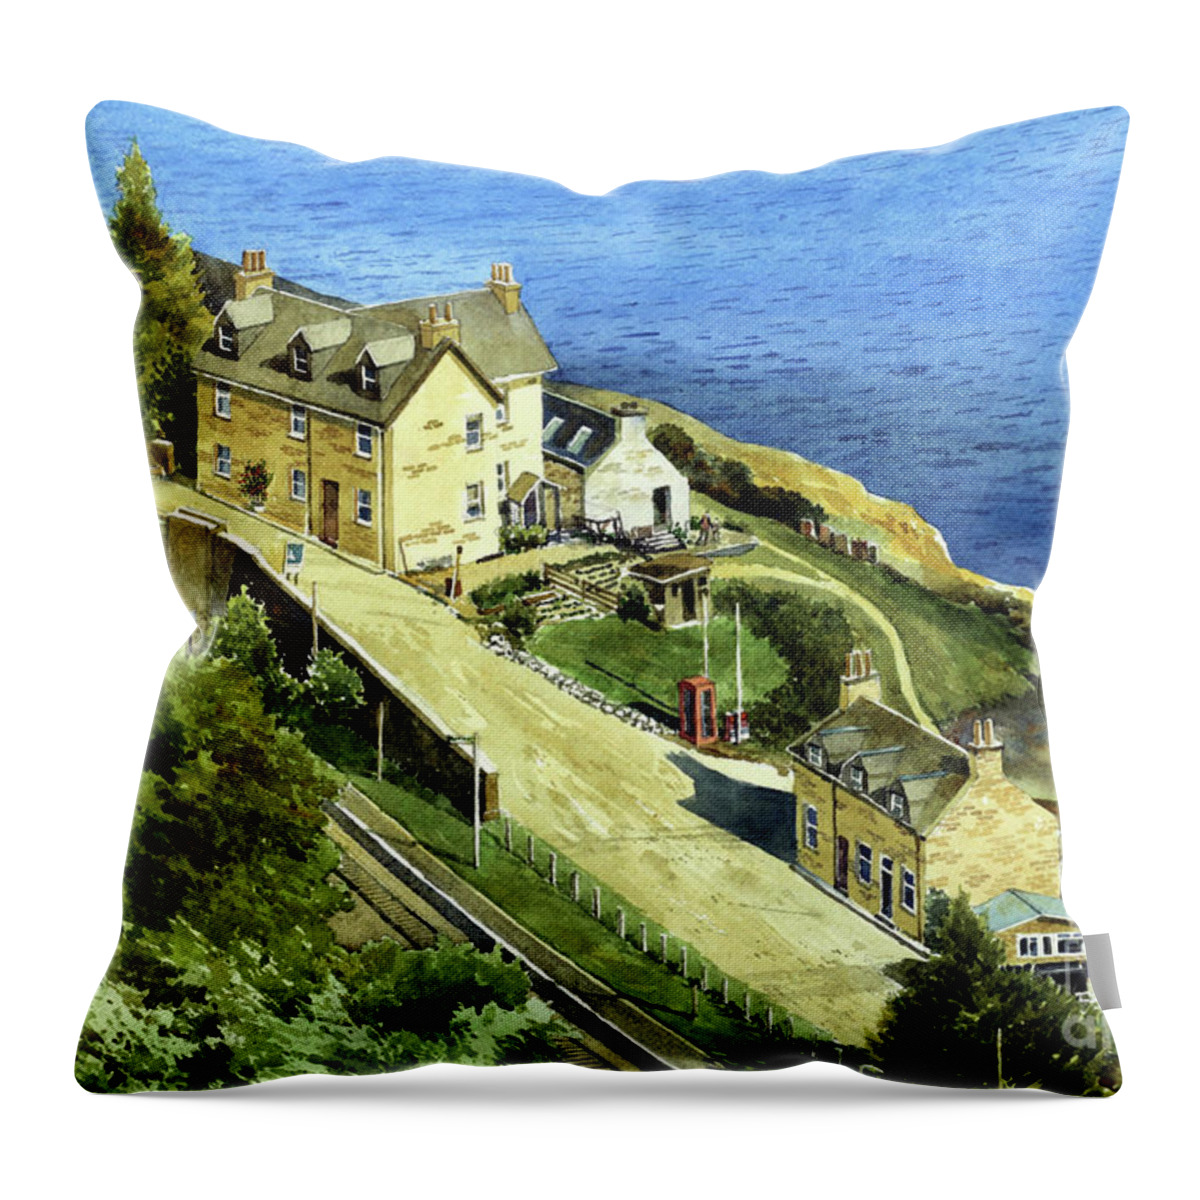 Scotland Throw Pillow featuring the painting Rail Station Scotland by William Band